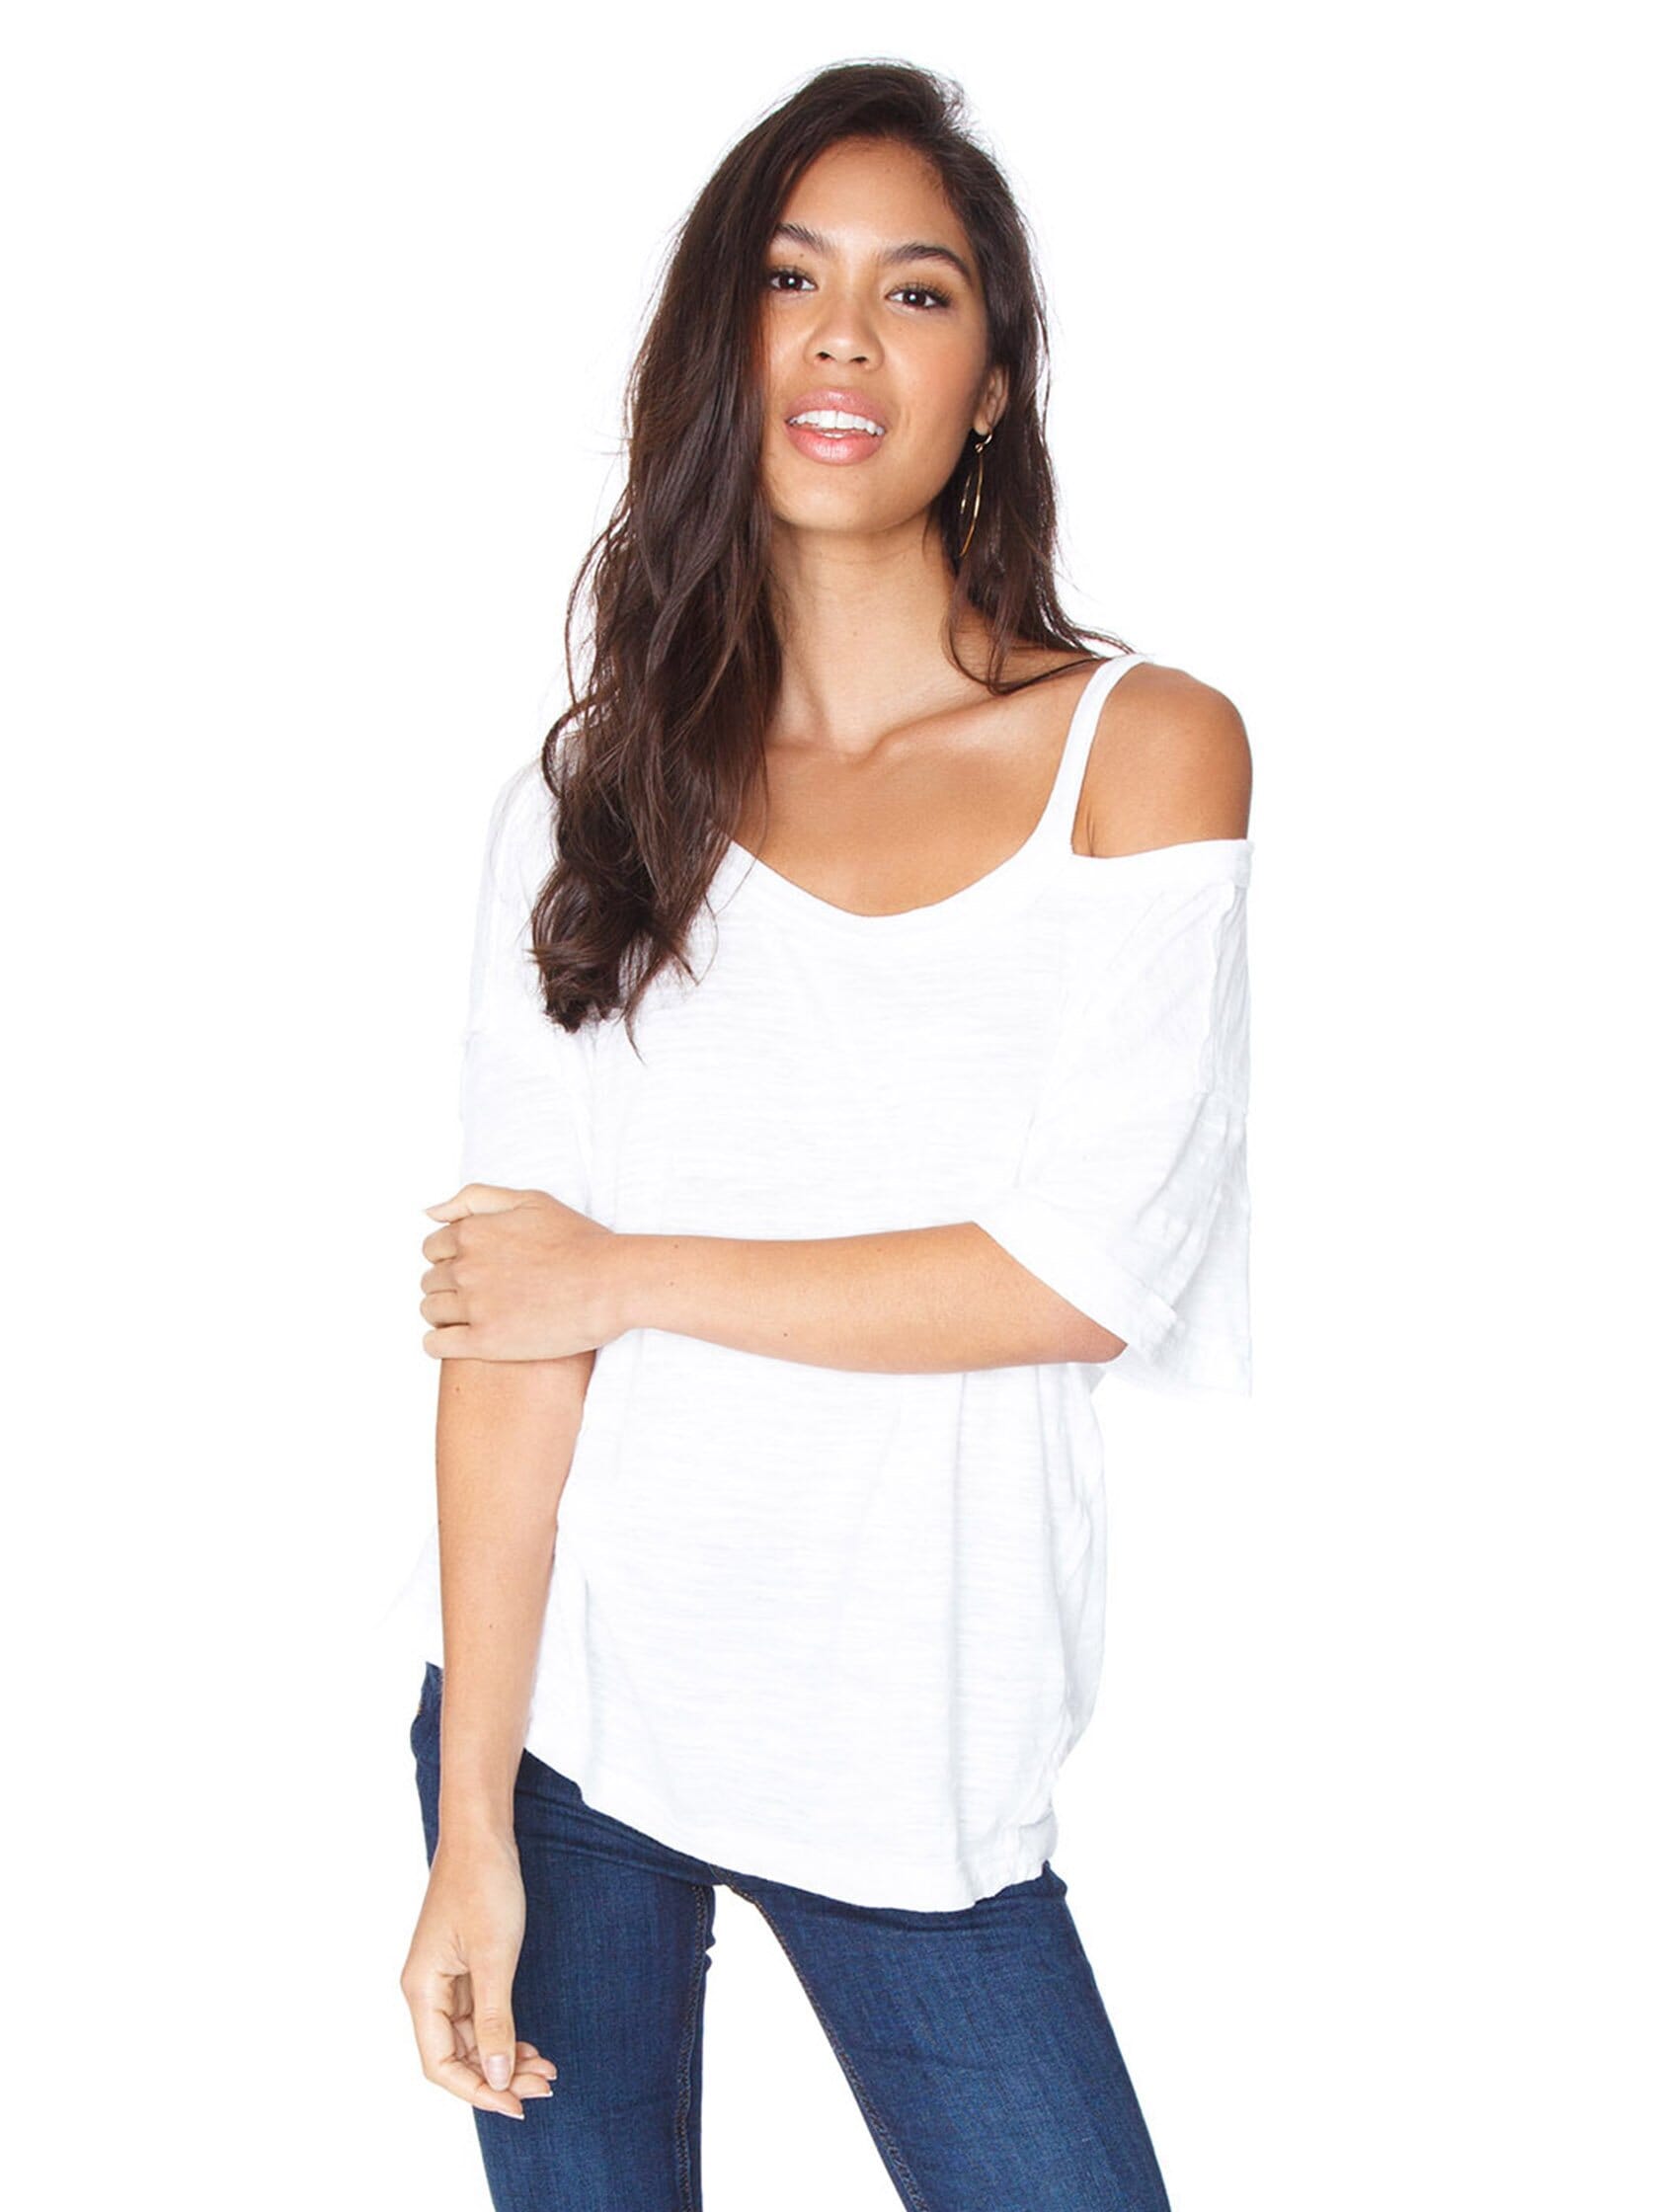 Free People Alex Tee in White